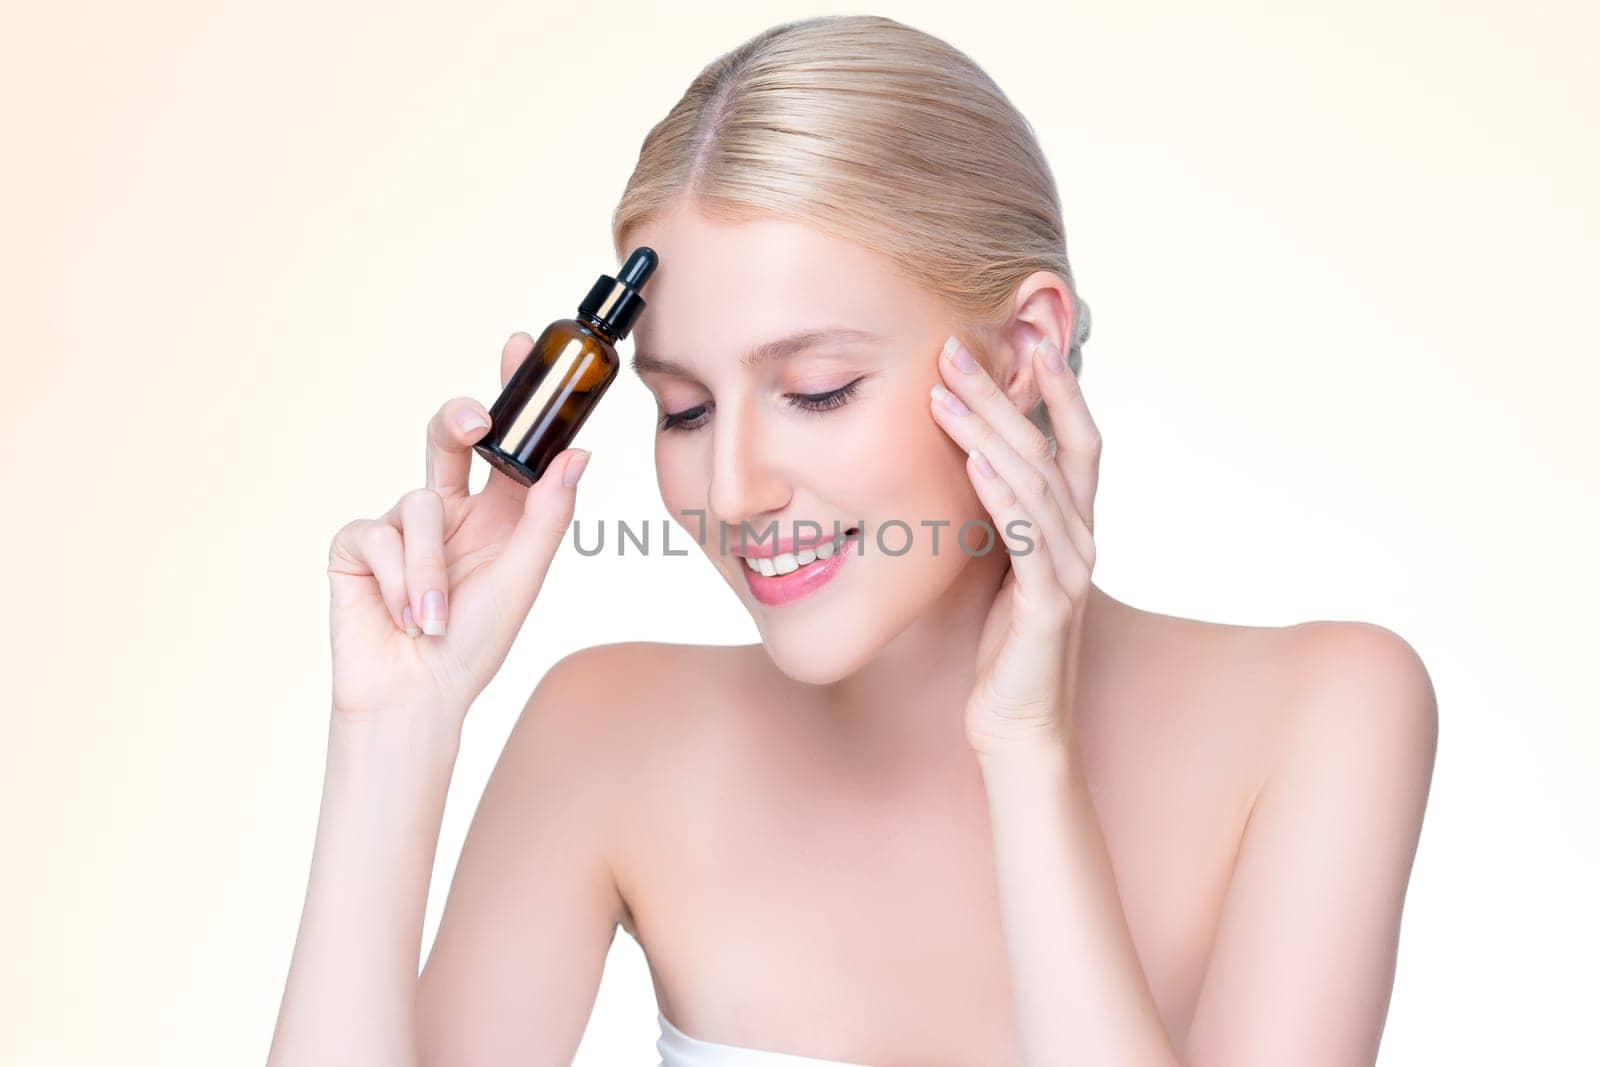 Personable portrait of beautiful woman applying essential oil bottle for skincare product. CBD oil dropper pipette for treatment and extracted cannabis concept in isolated background.